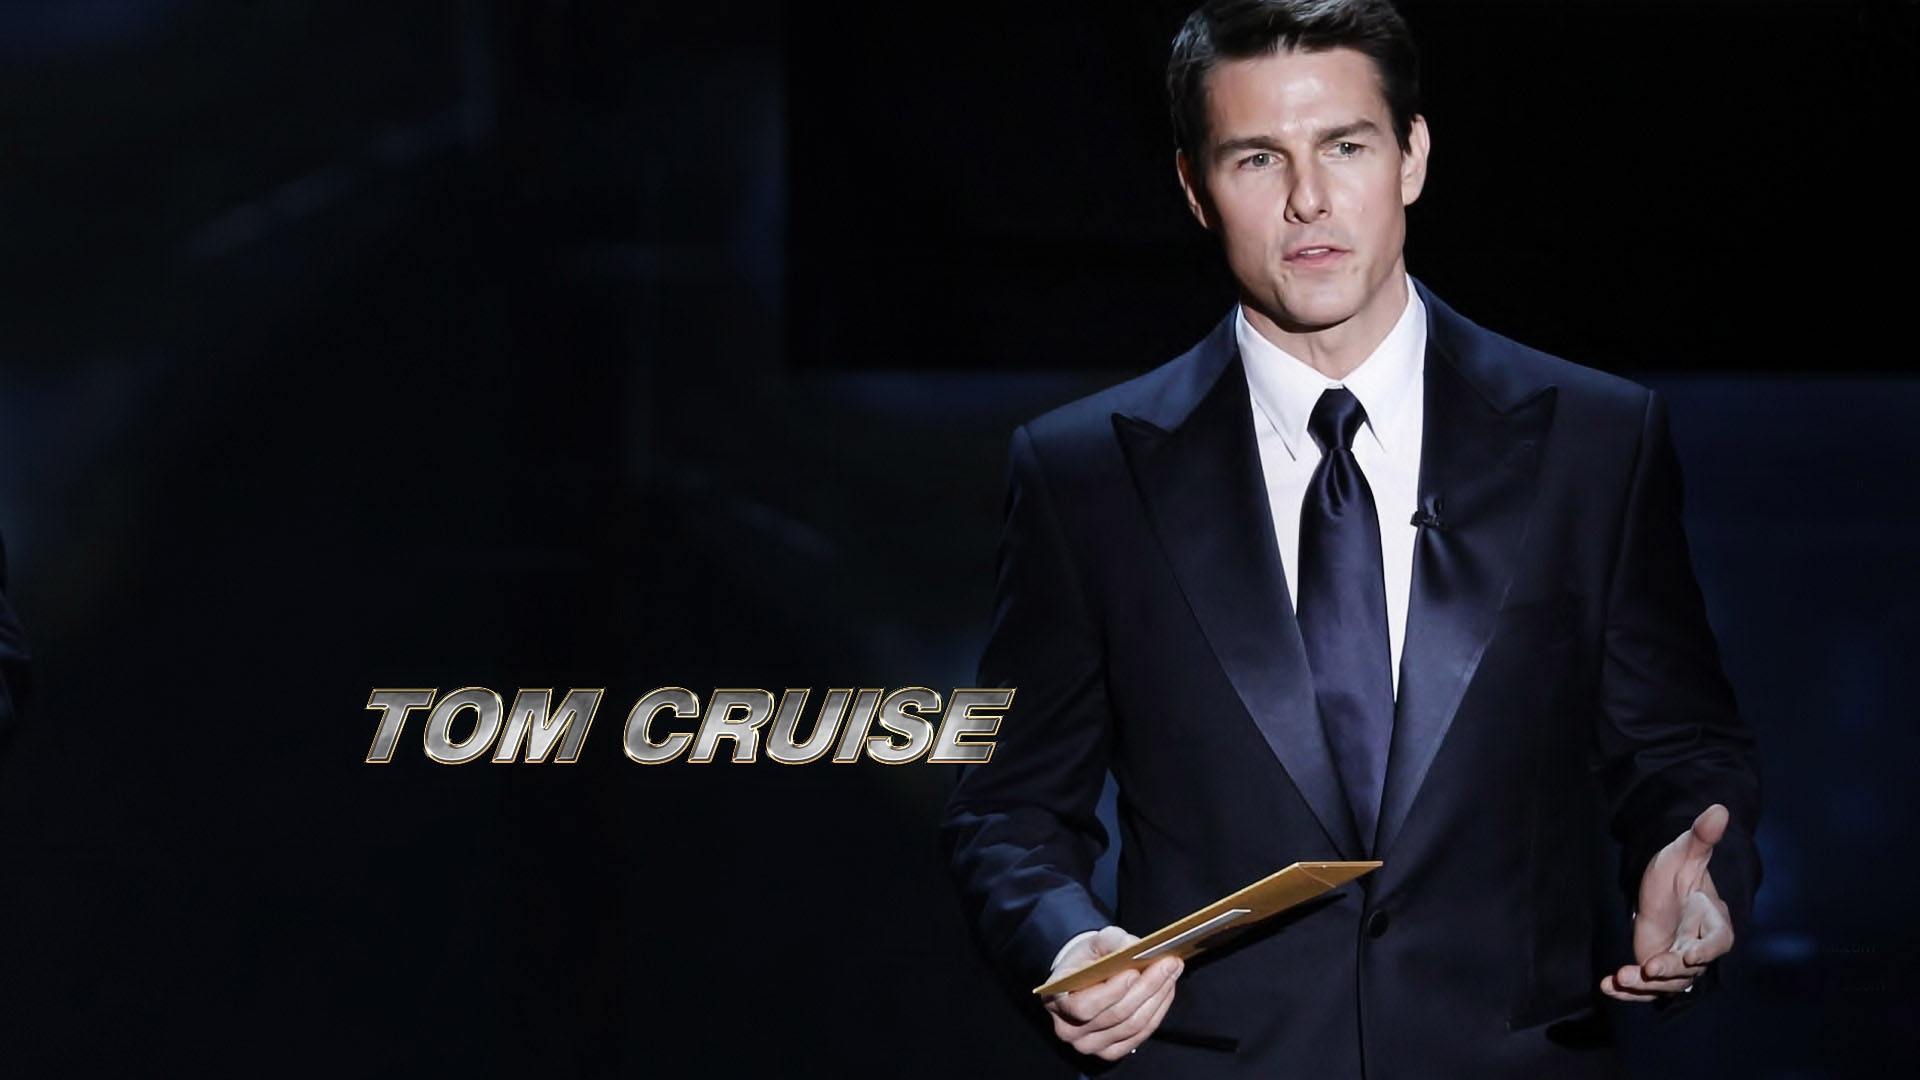 Tom Cruise Oscars 2012 , HD Wallpaper & Backgrounds